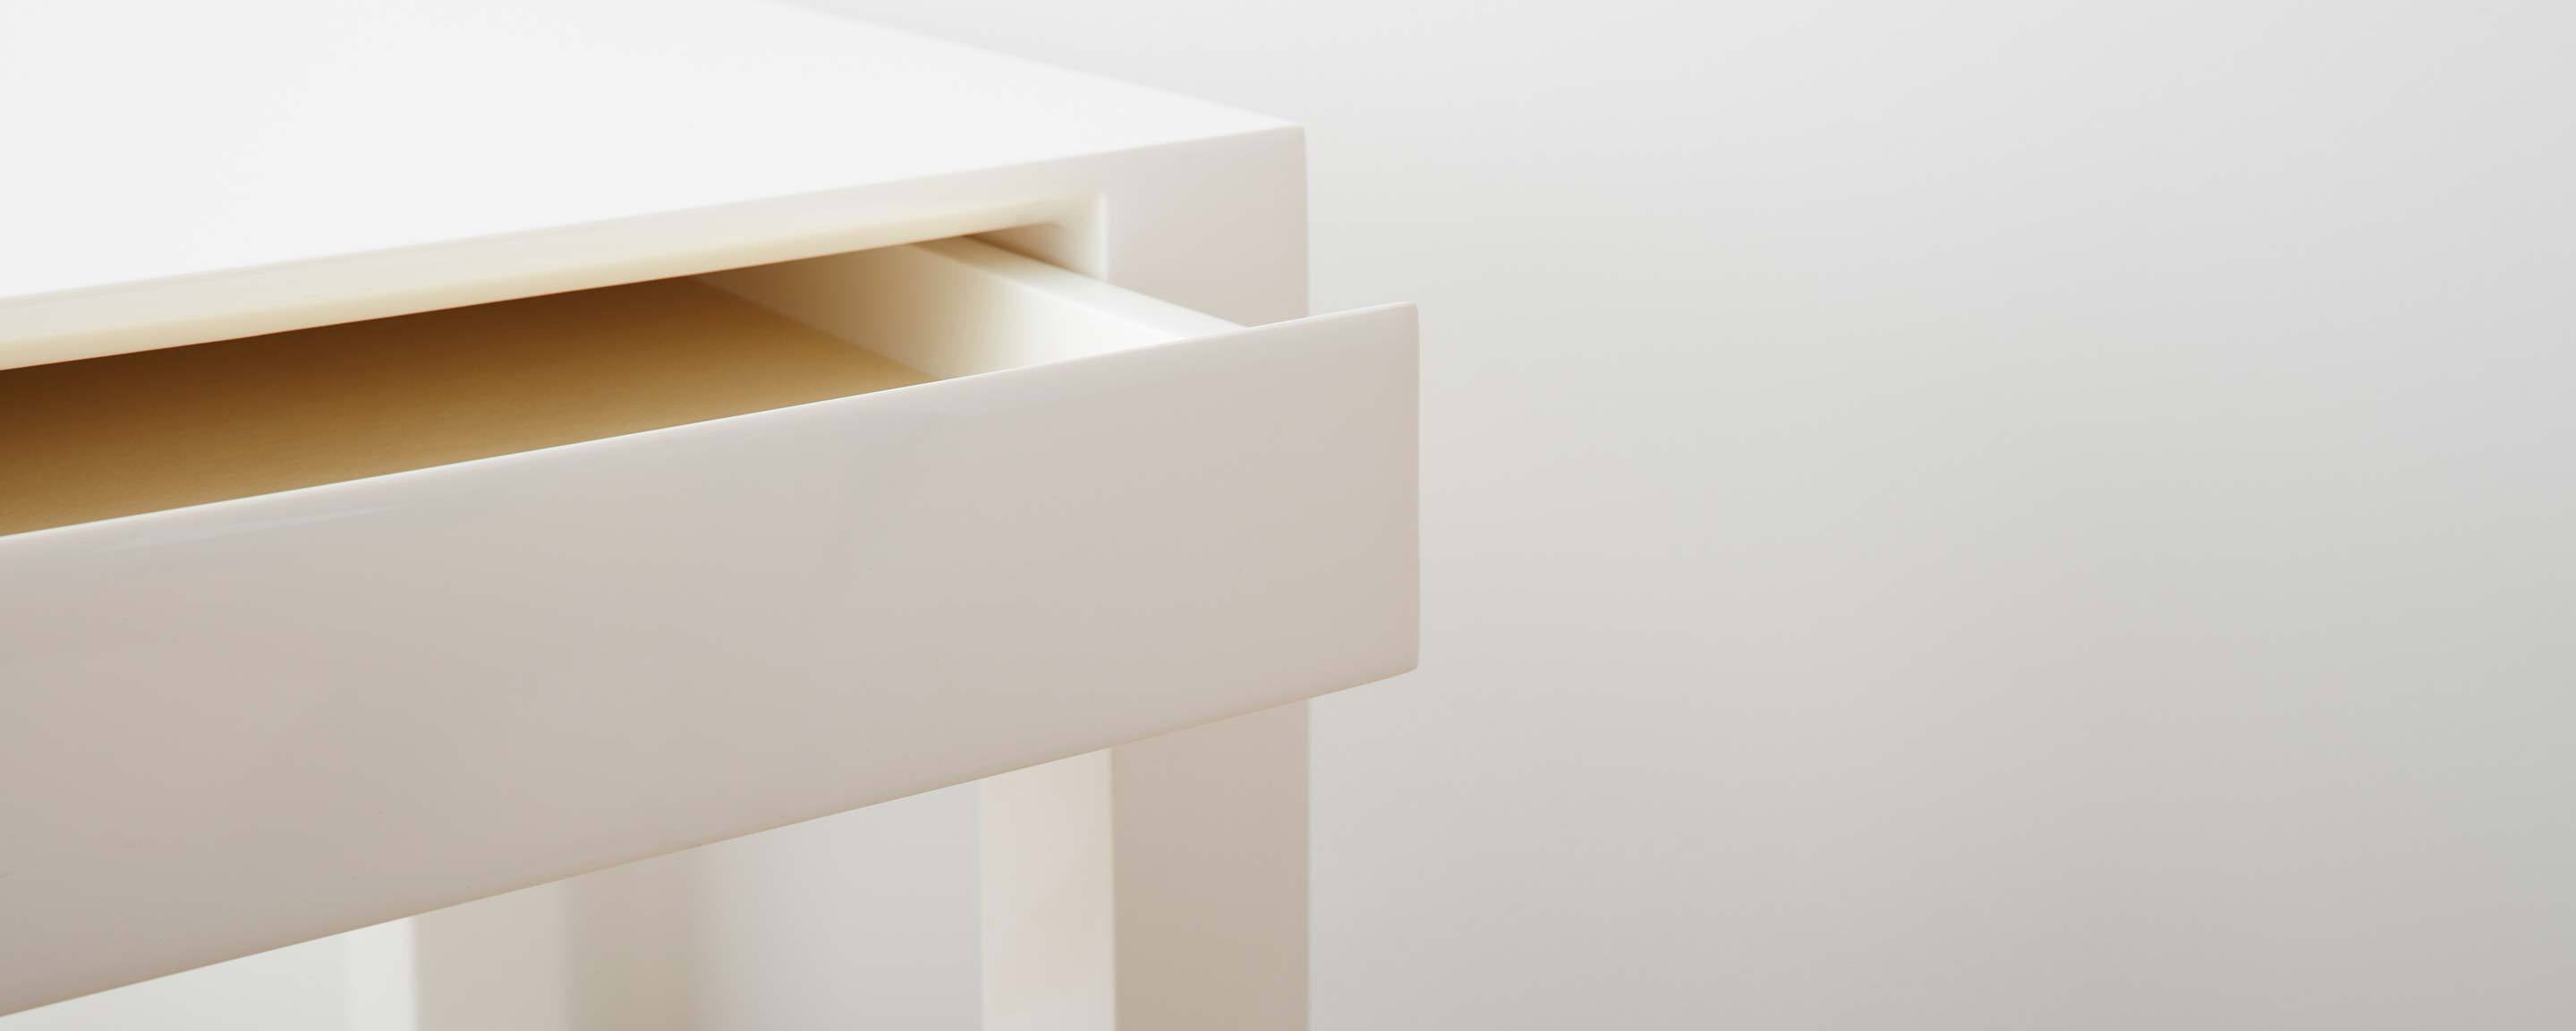 the lacquer lido end table